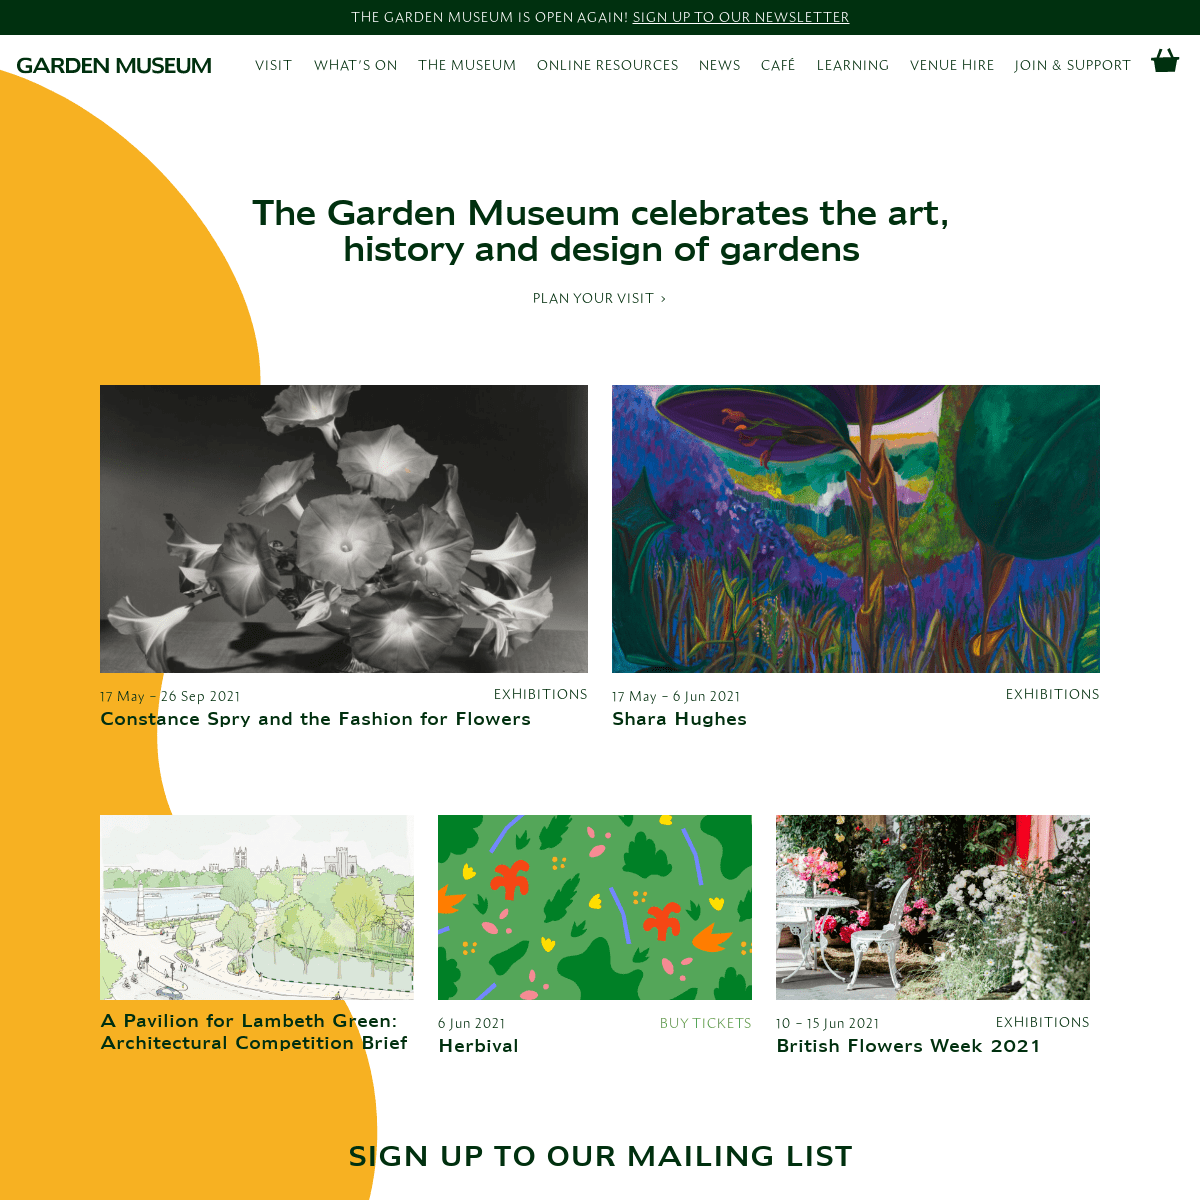 A complete backup of https://gardenmuseum.org.uk